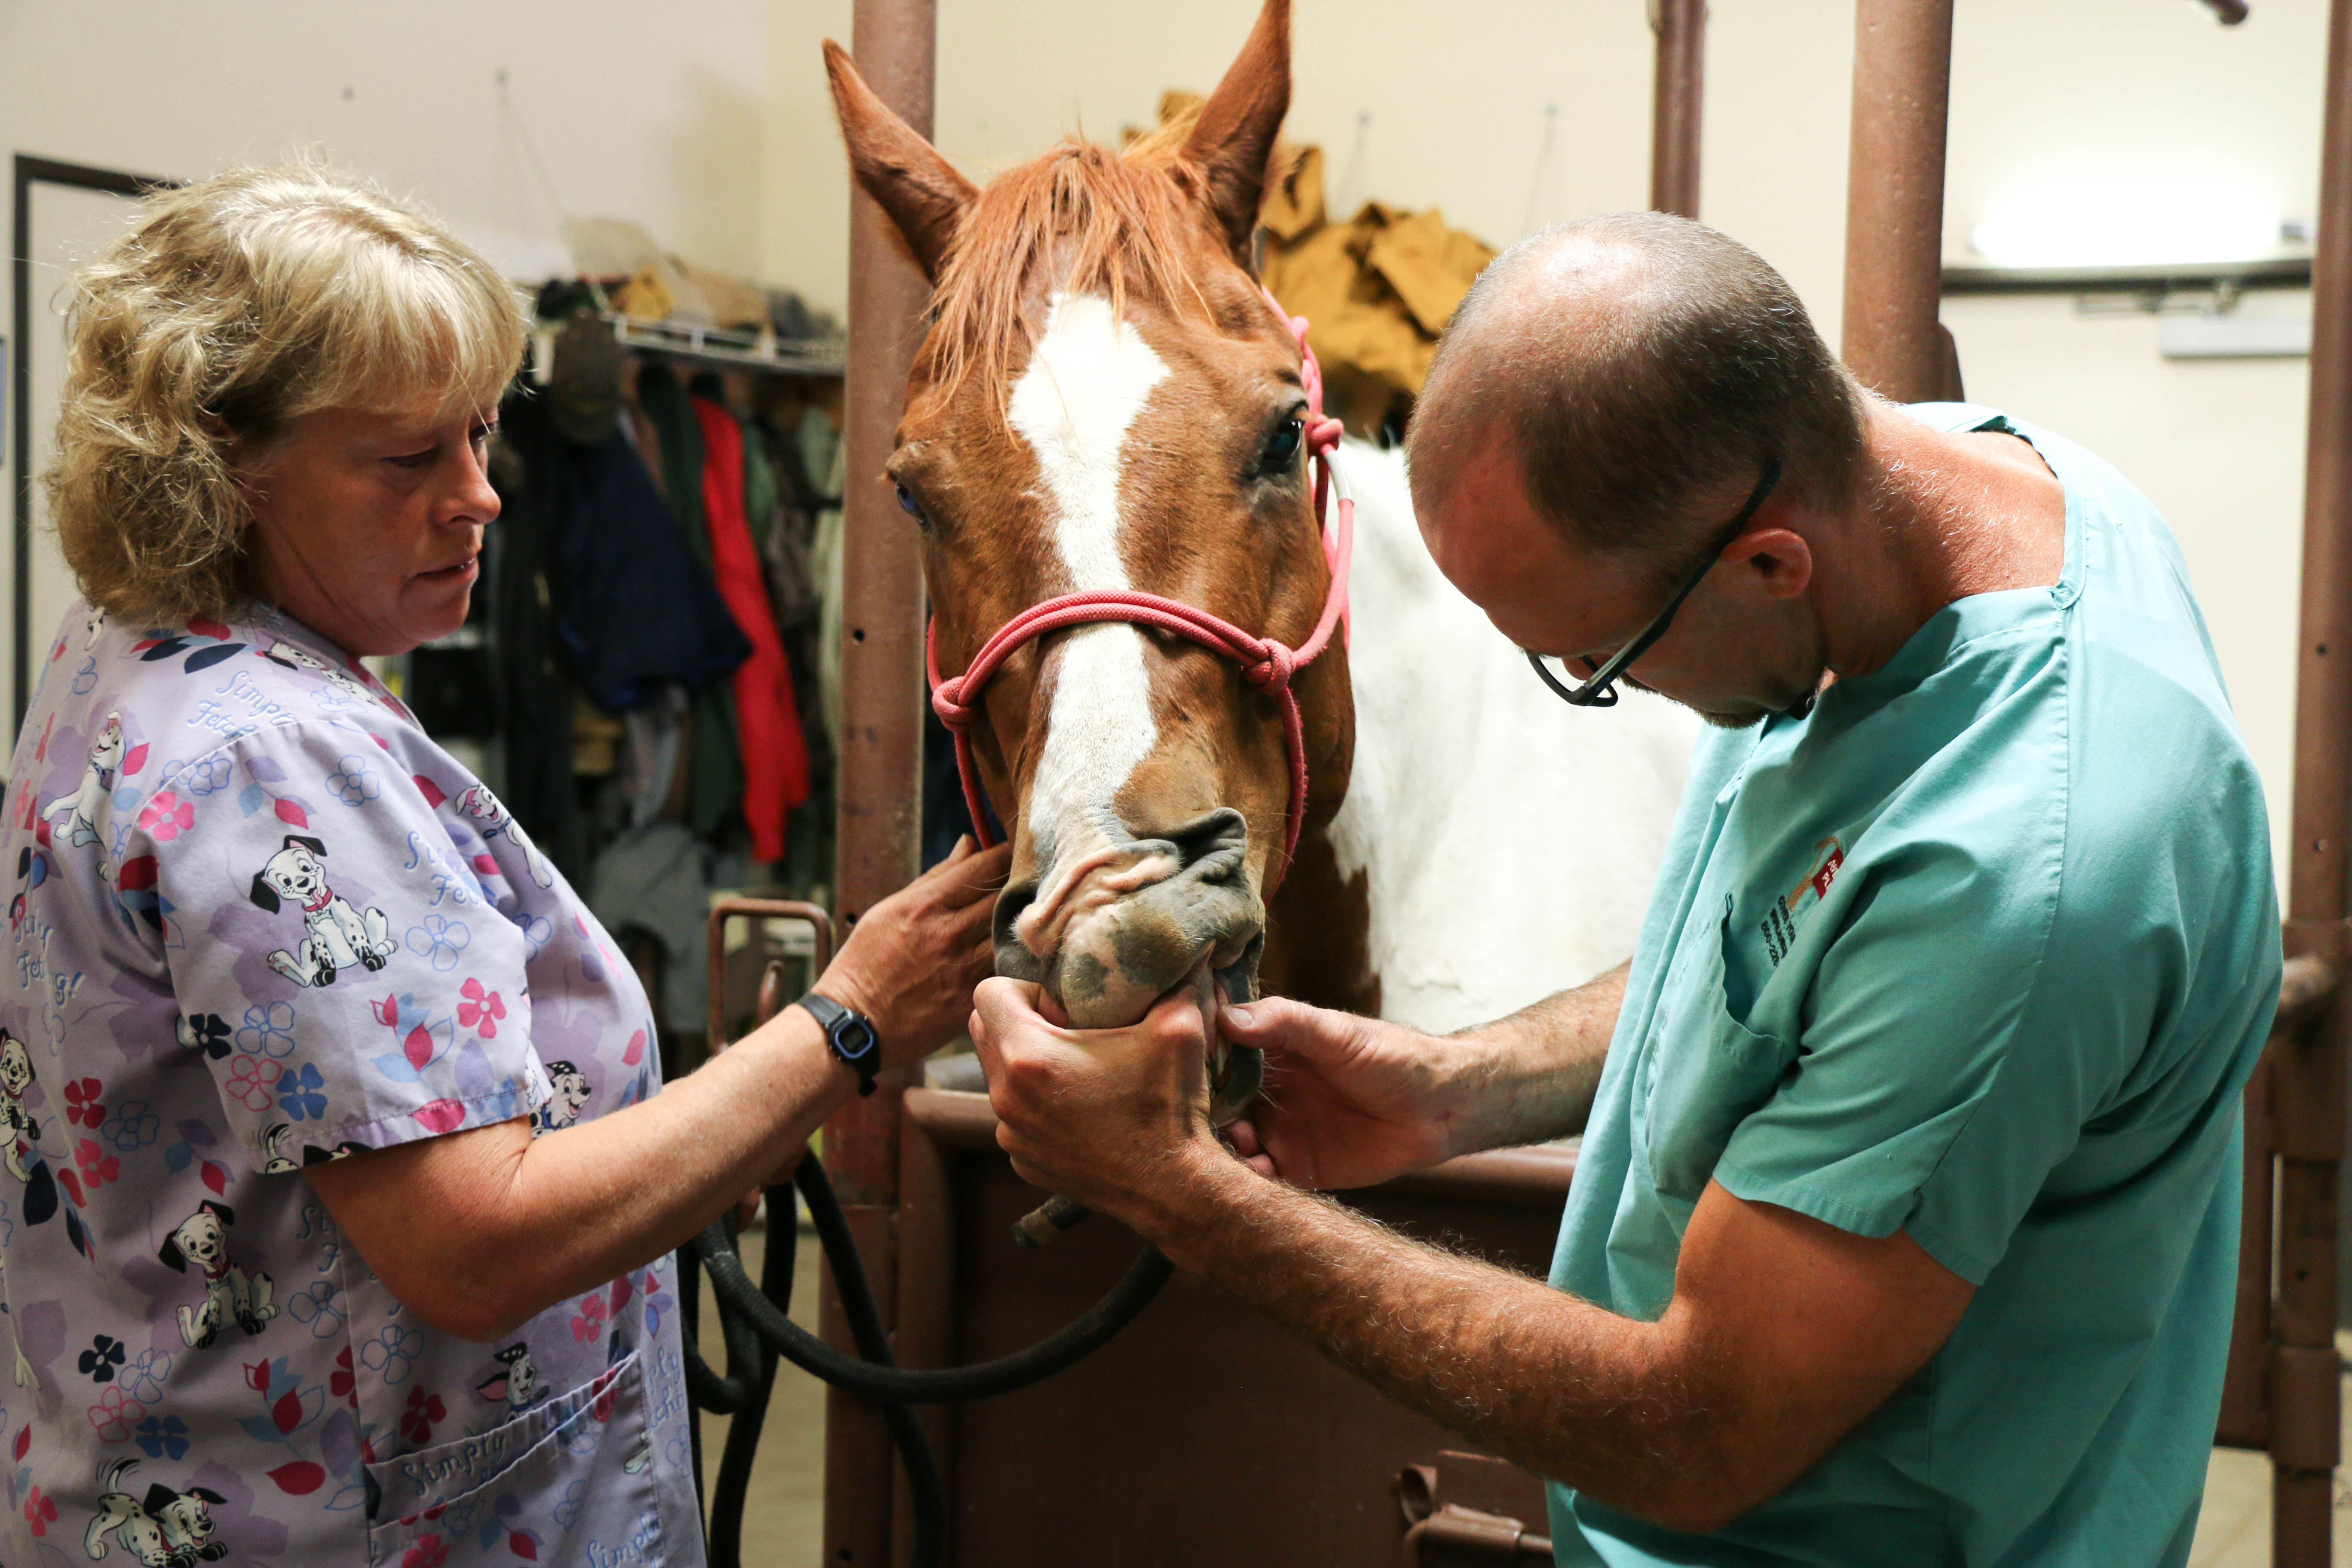 Fourmile Veterinary Clinic is designed and fully equipped to treat horses.